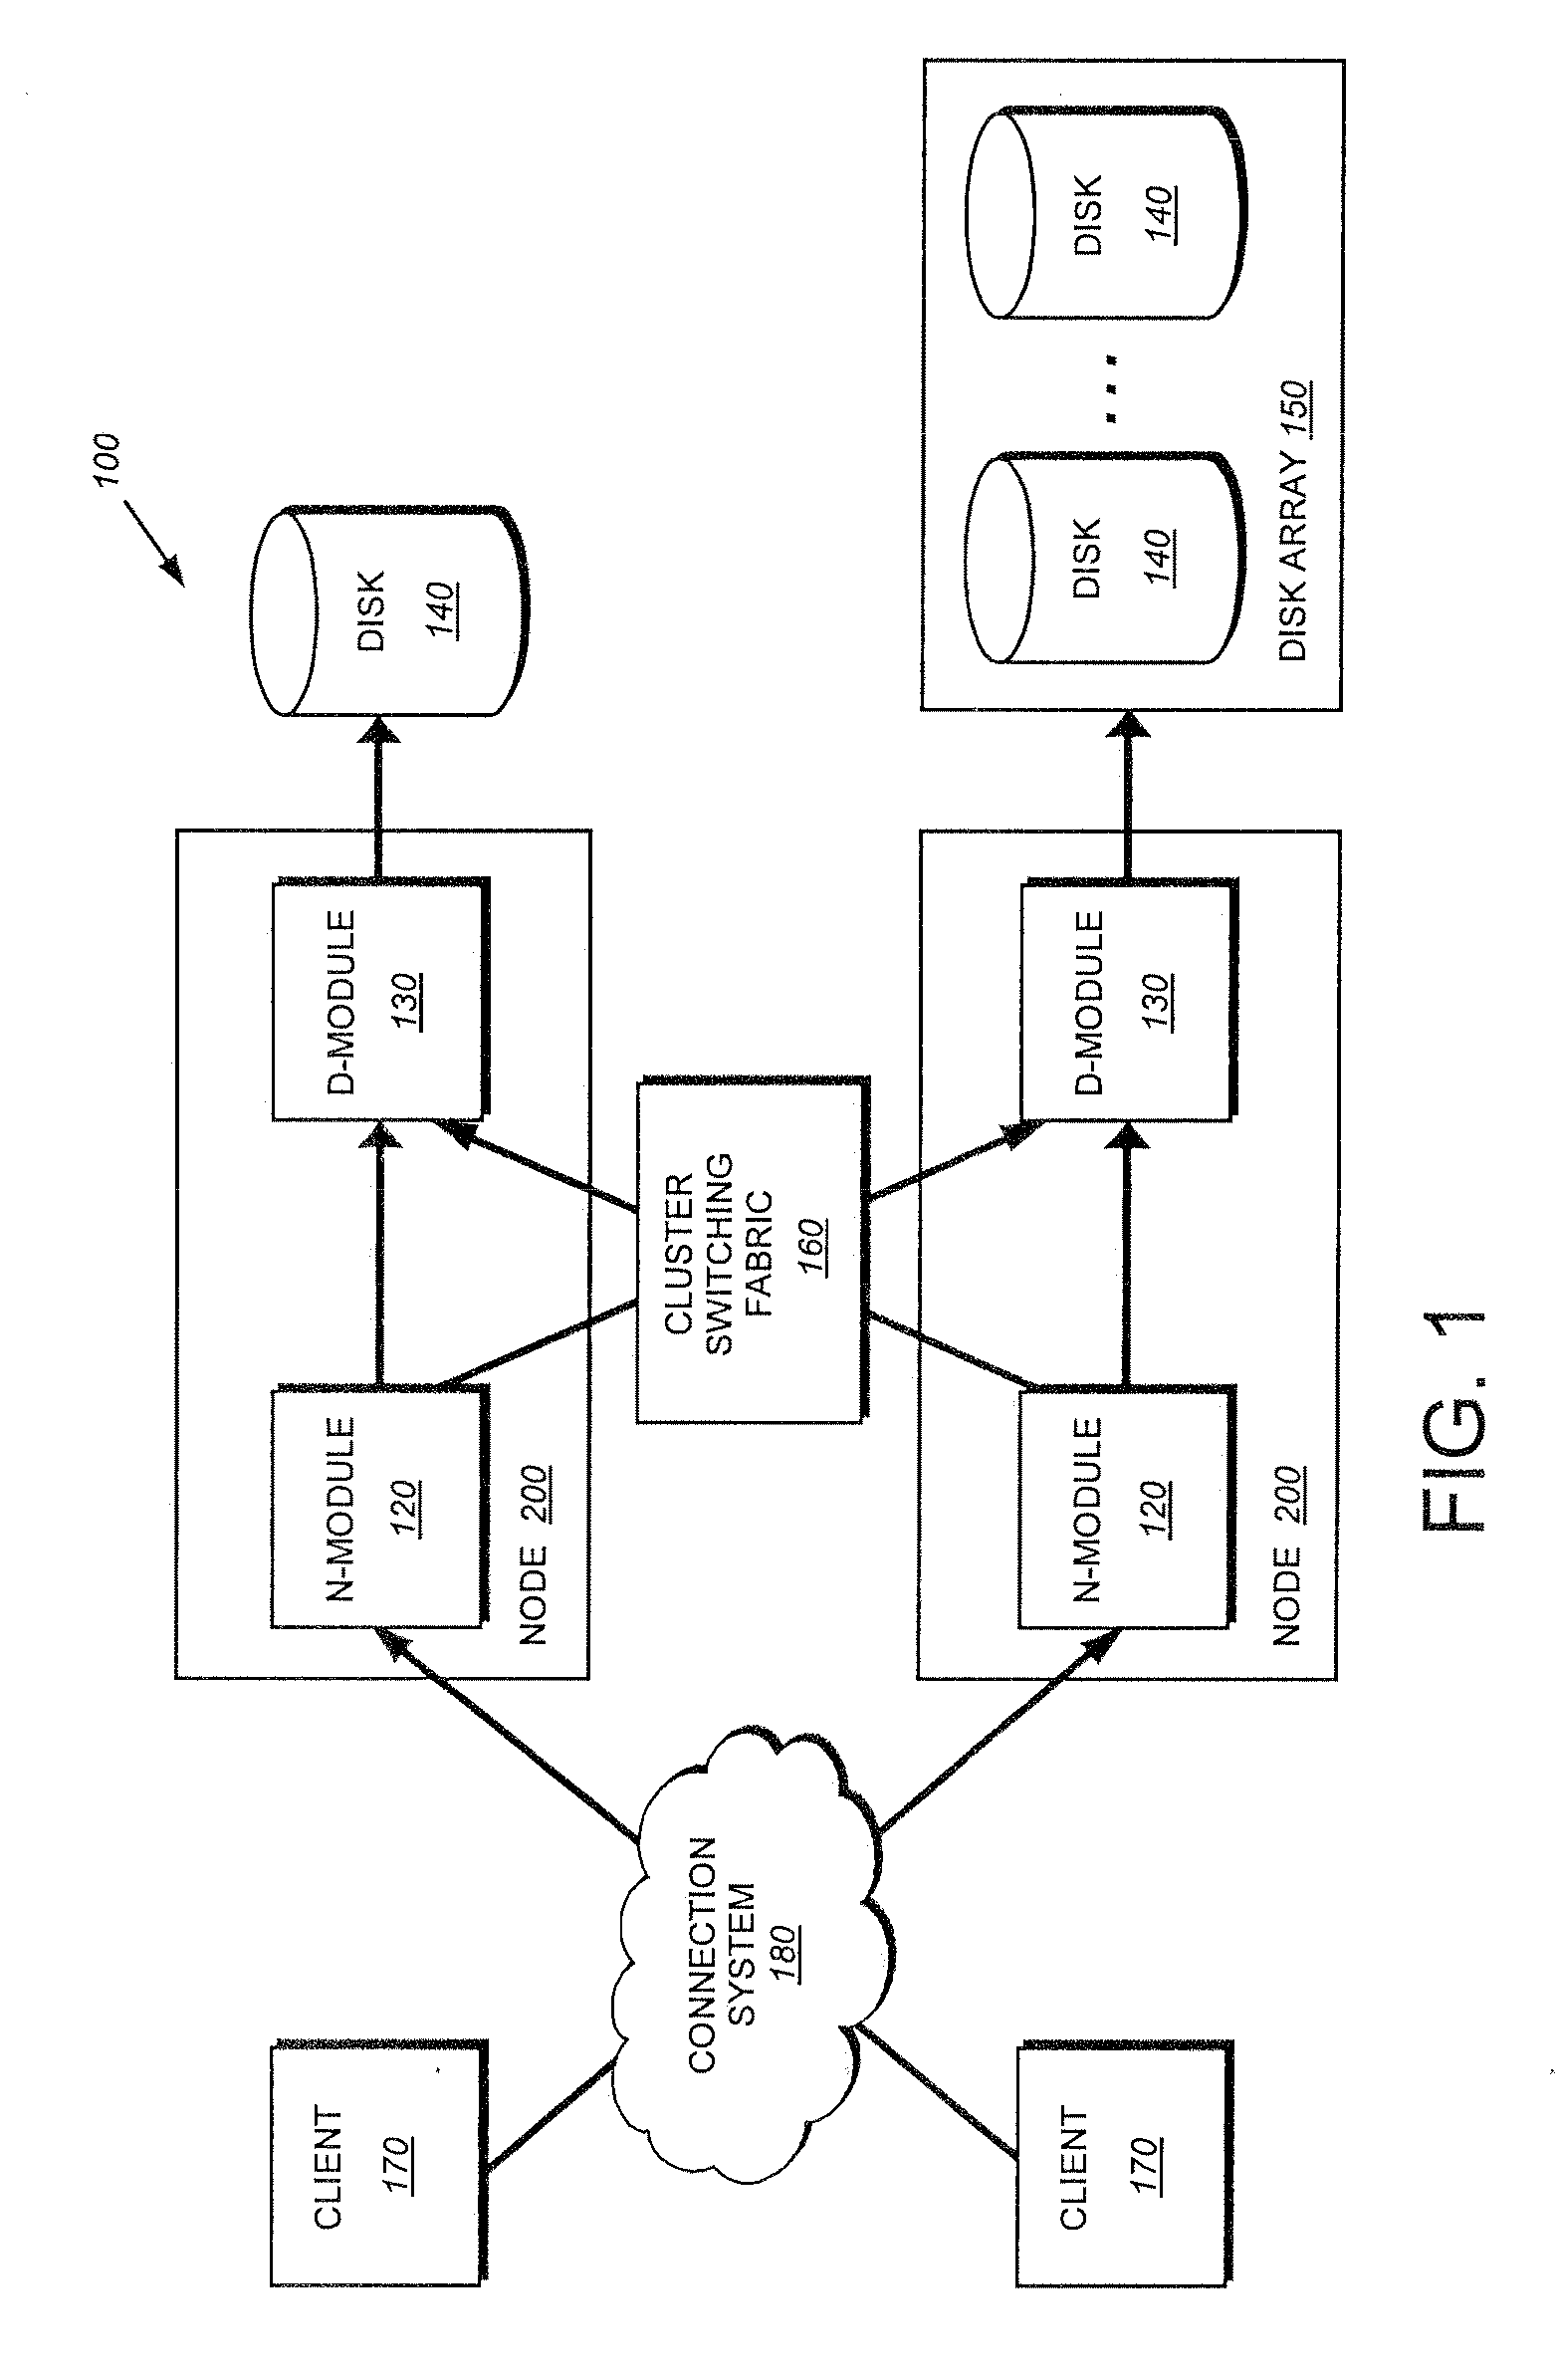 Method and apparatus for offloading network processes in a computer storage system